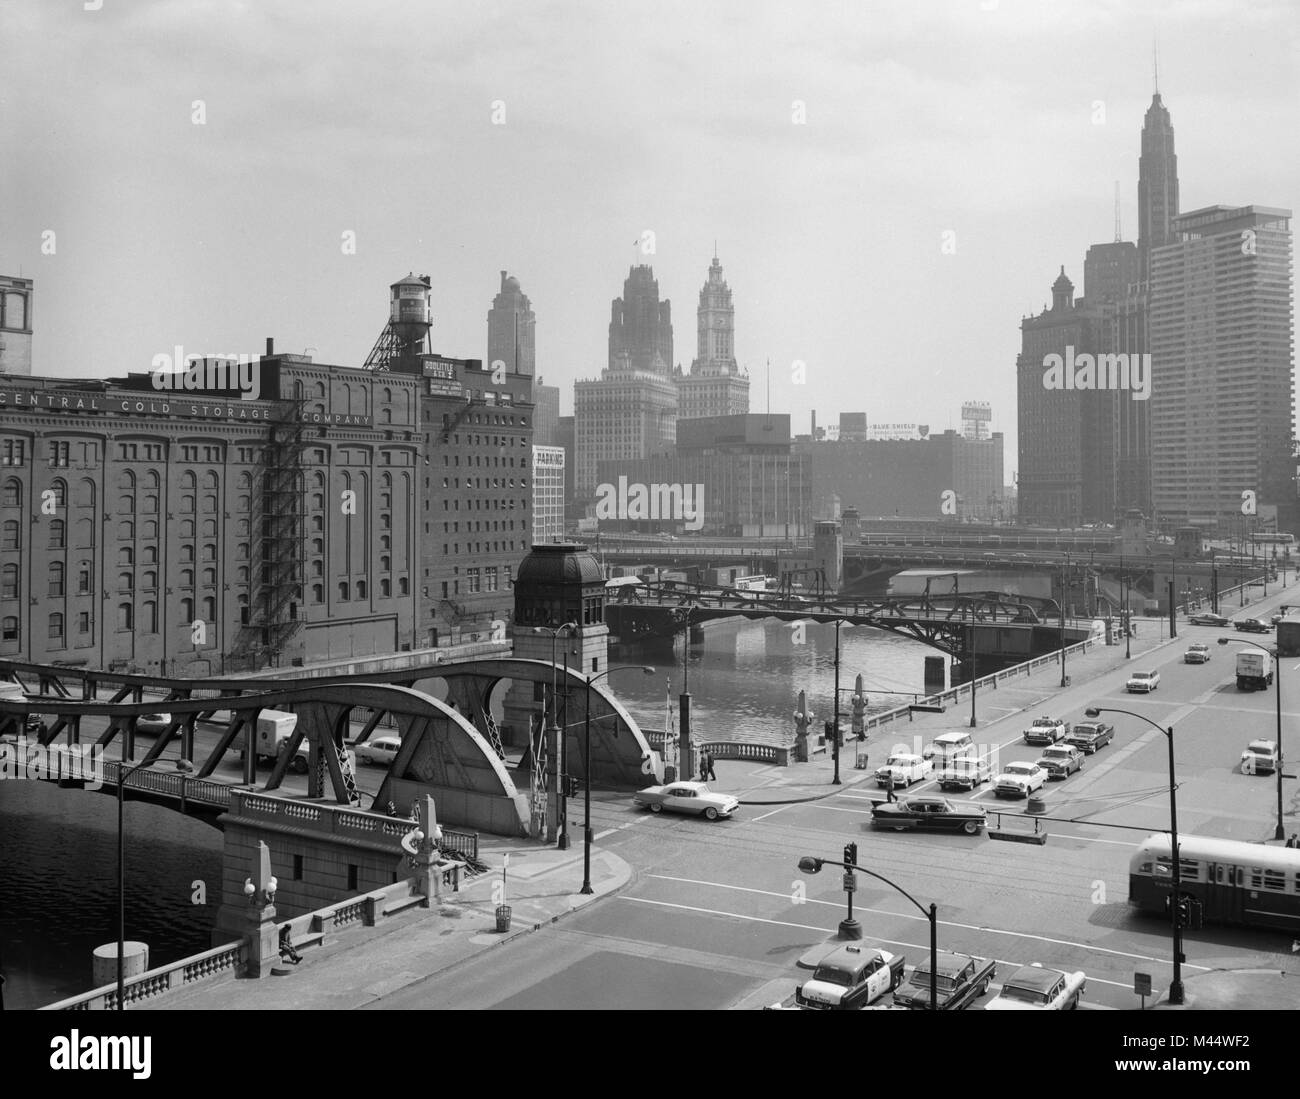 View of Chicago looking east over the Chicago River, ca. 1960. Intersection in foreground is the intersection of Clark  St. and Wacker Drive. Stock Photo